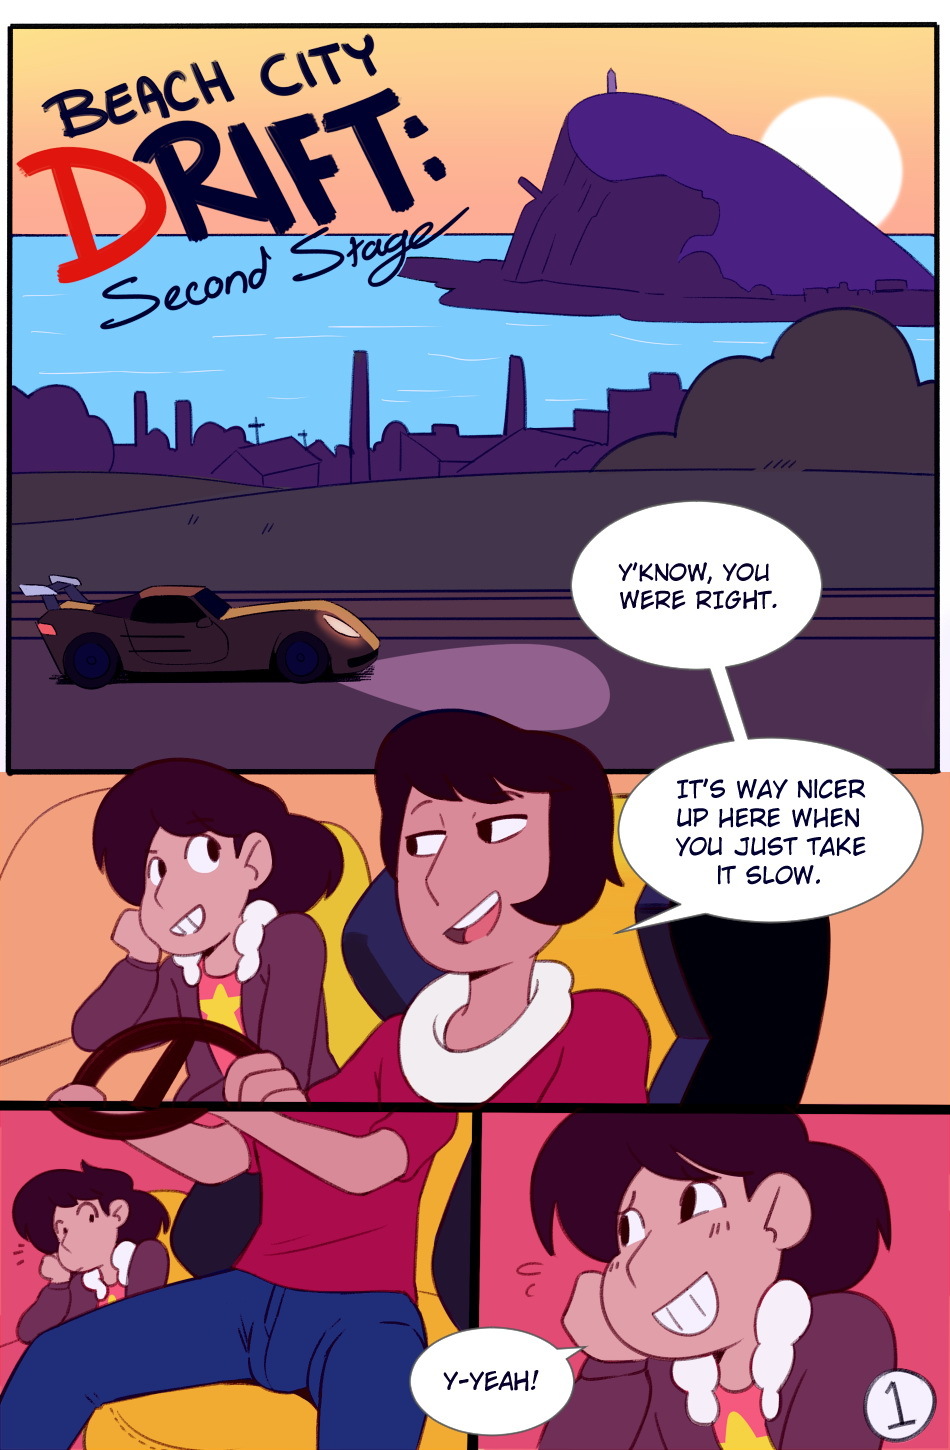 Beach City Drift: Second Stage - Page 1